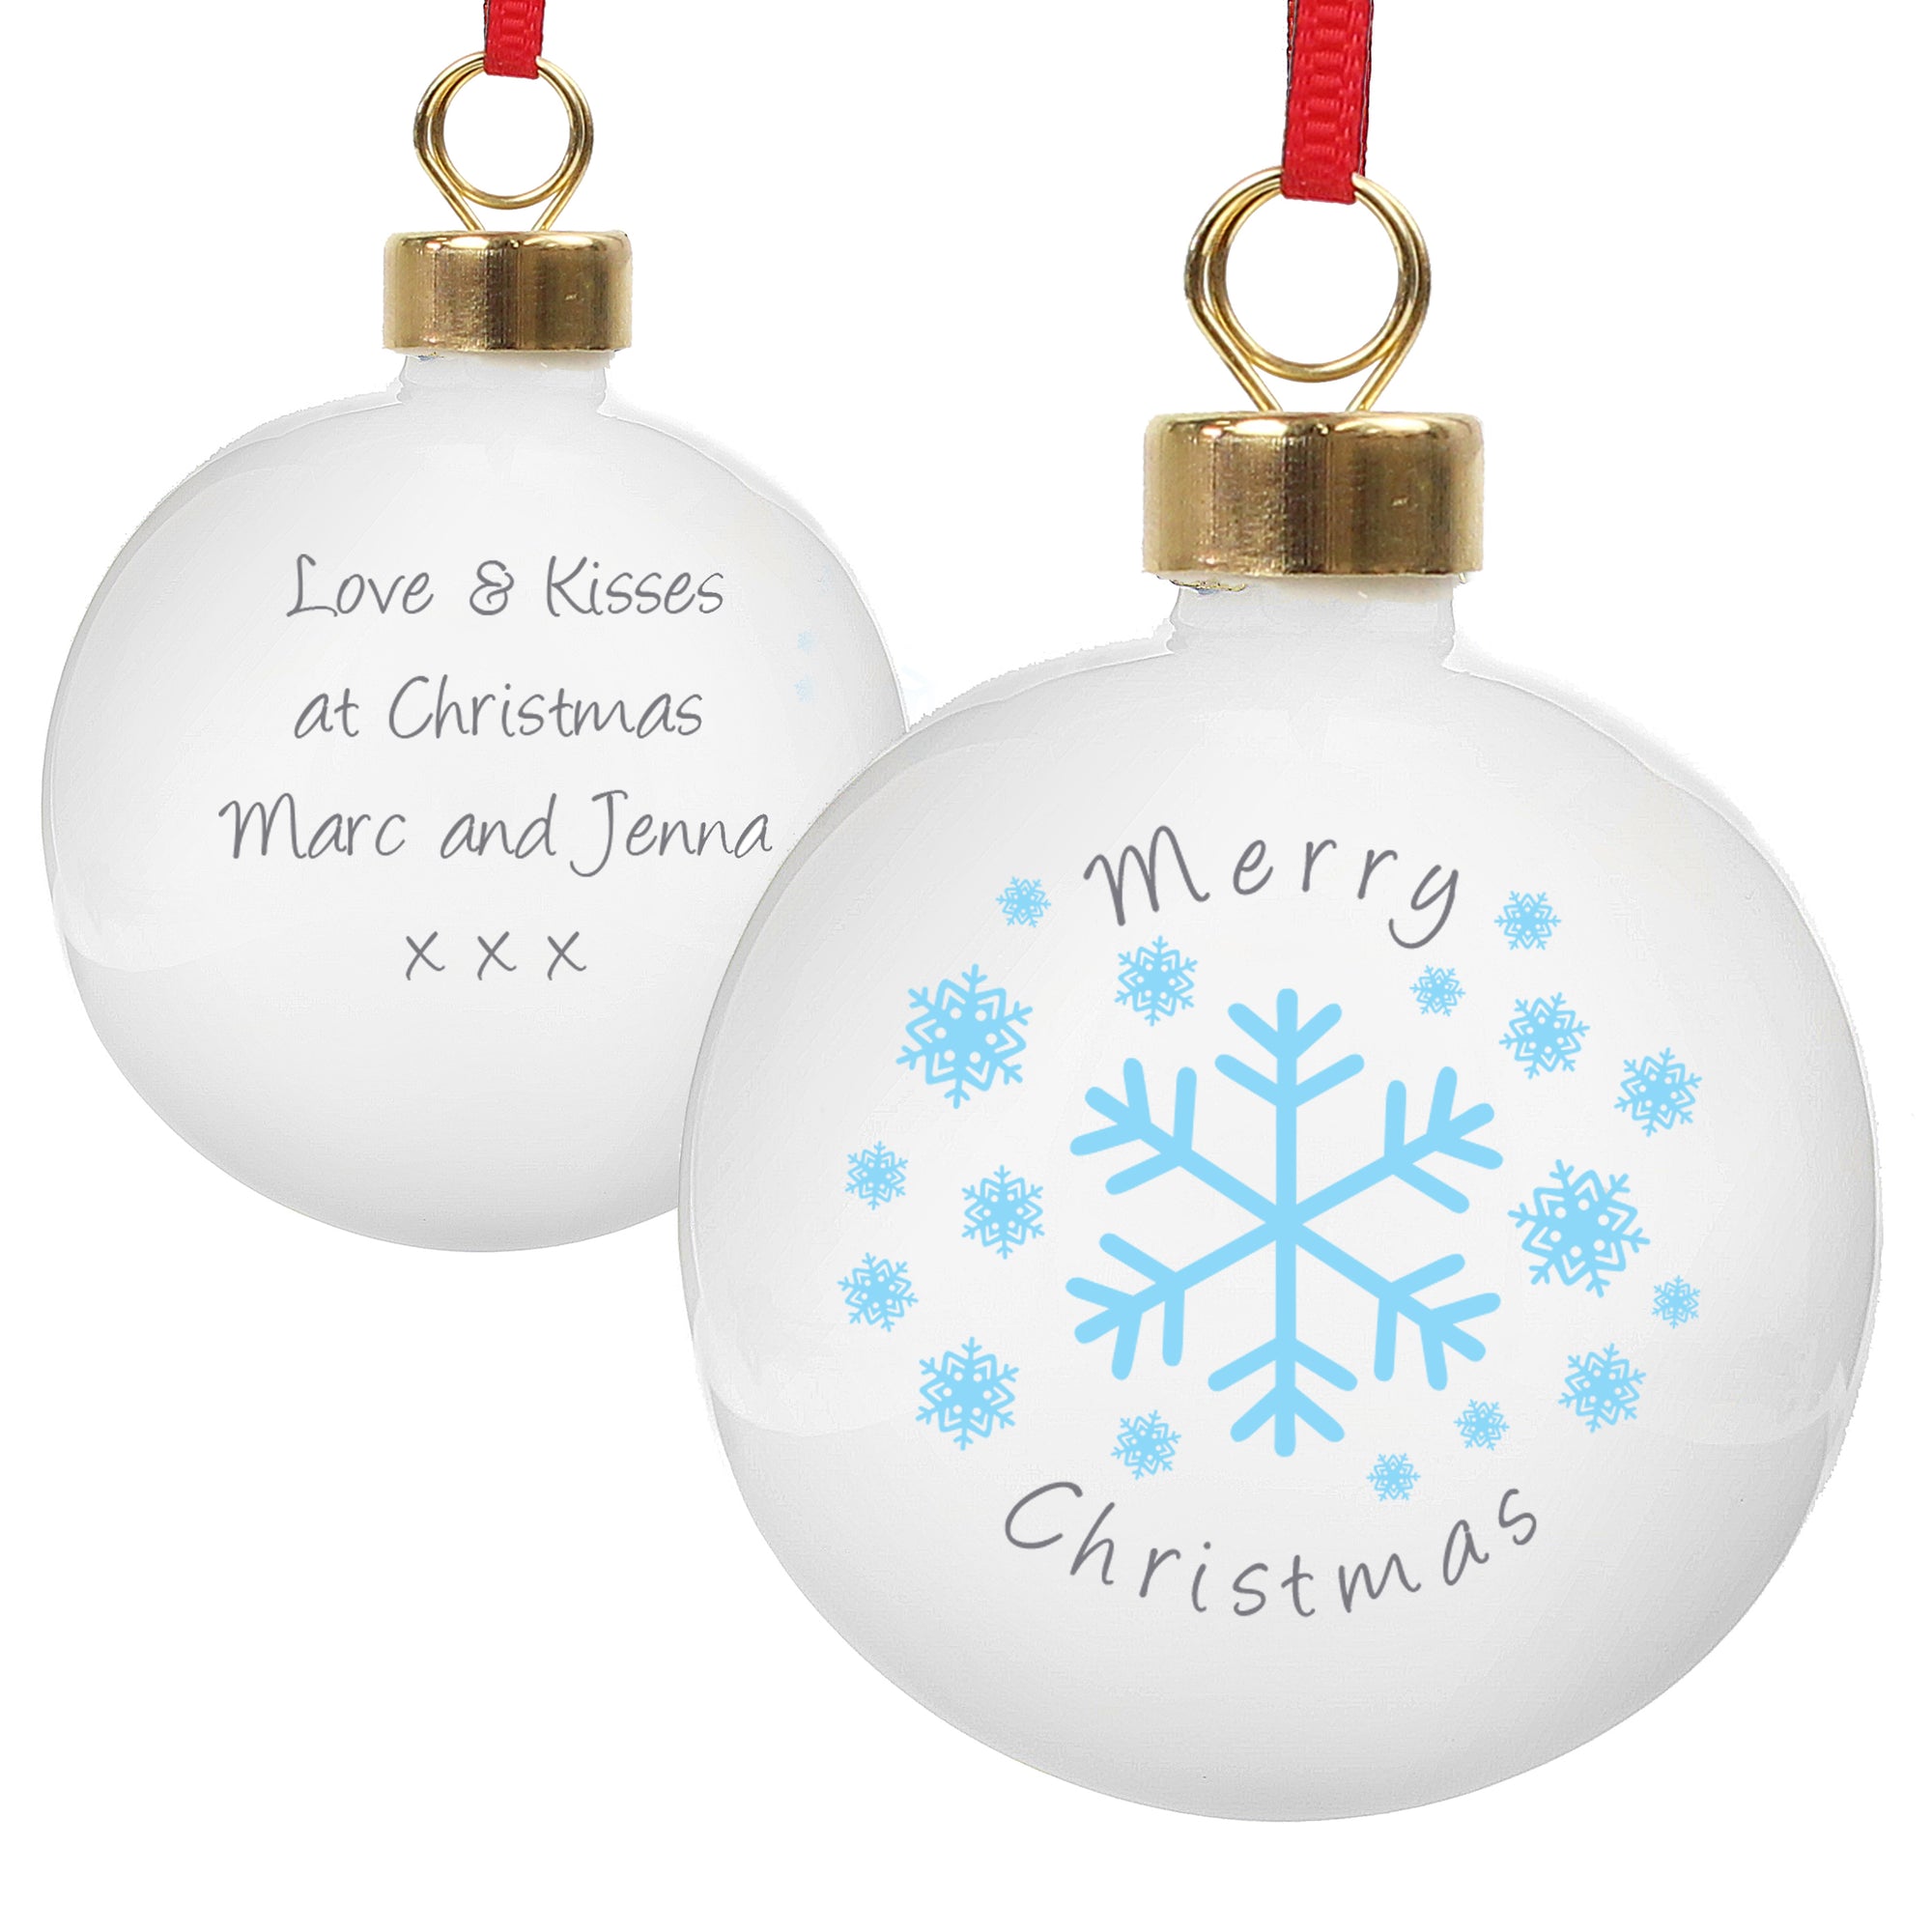 Personalised white ceramic round Christmas tree bauble featuring a blue snowflake design on the front and the words 'Merry Christmas' in black. The rear of the bauble can be personalised with your own message over 4 lines in a black font.